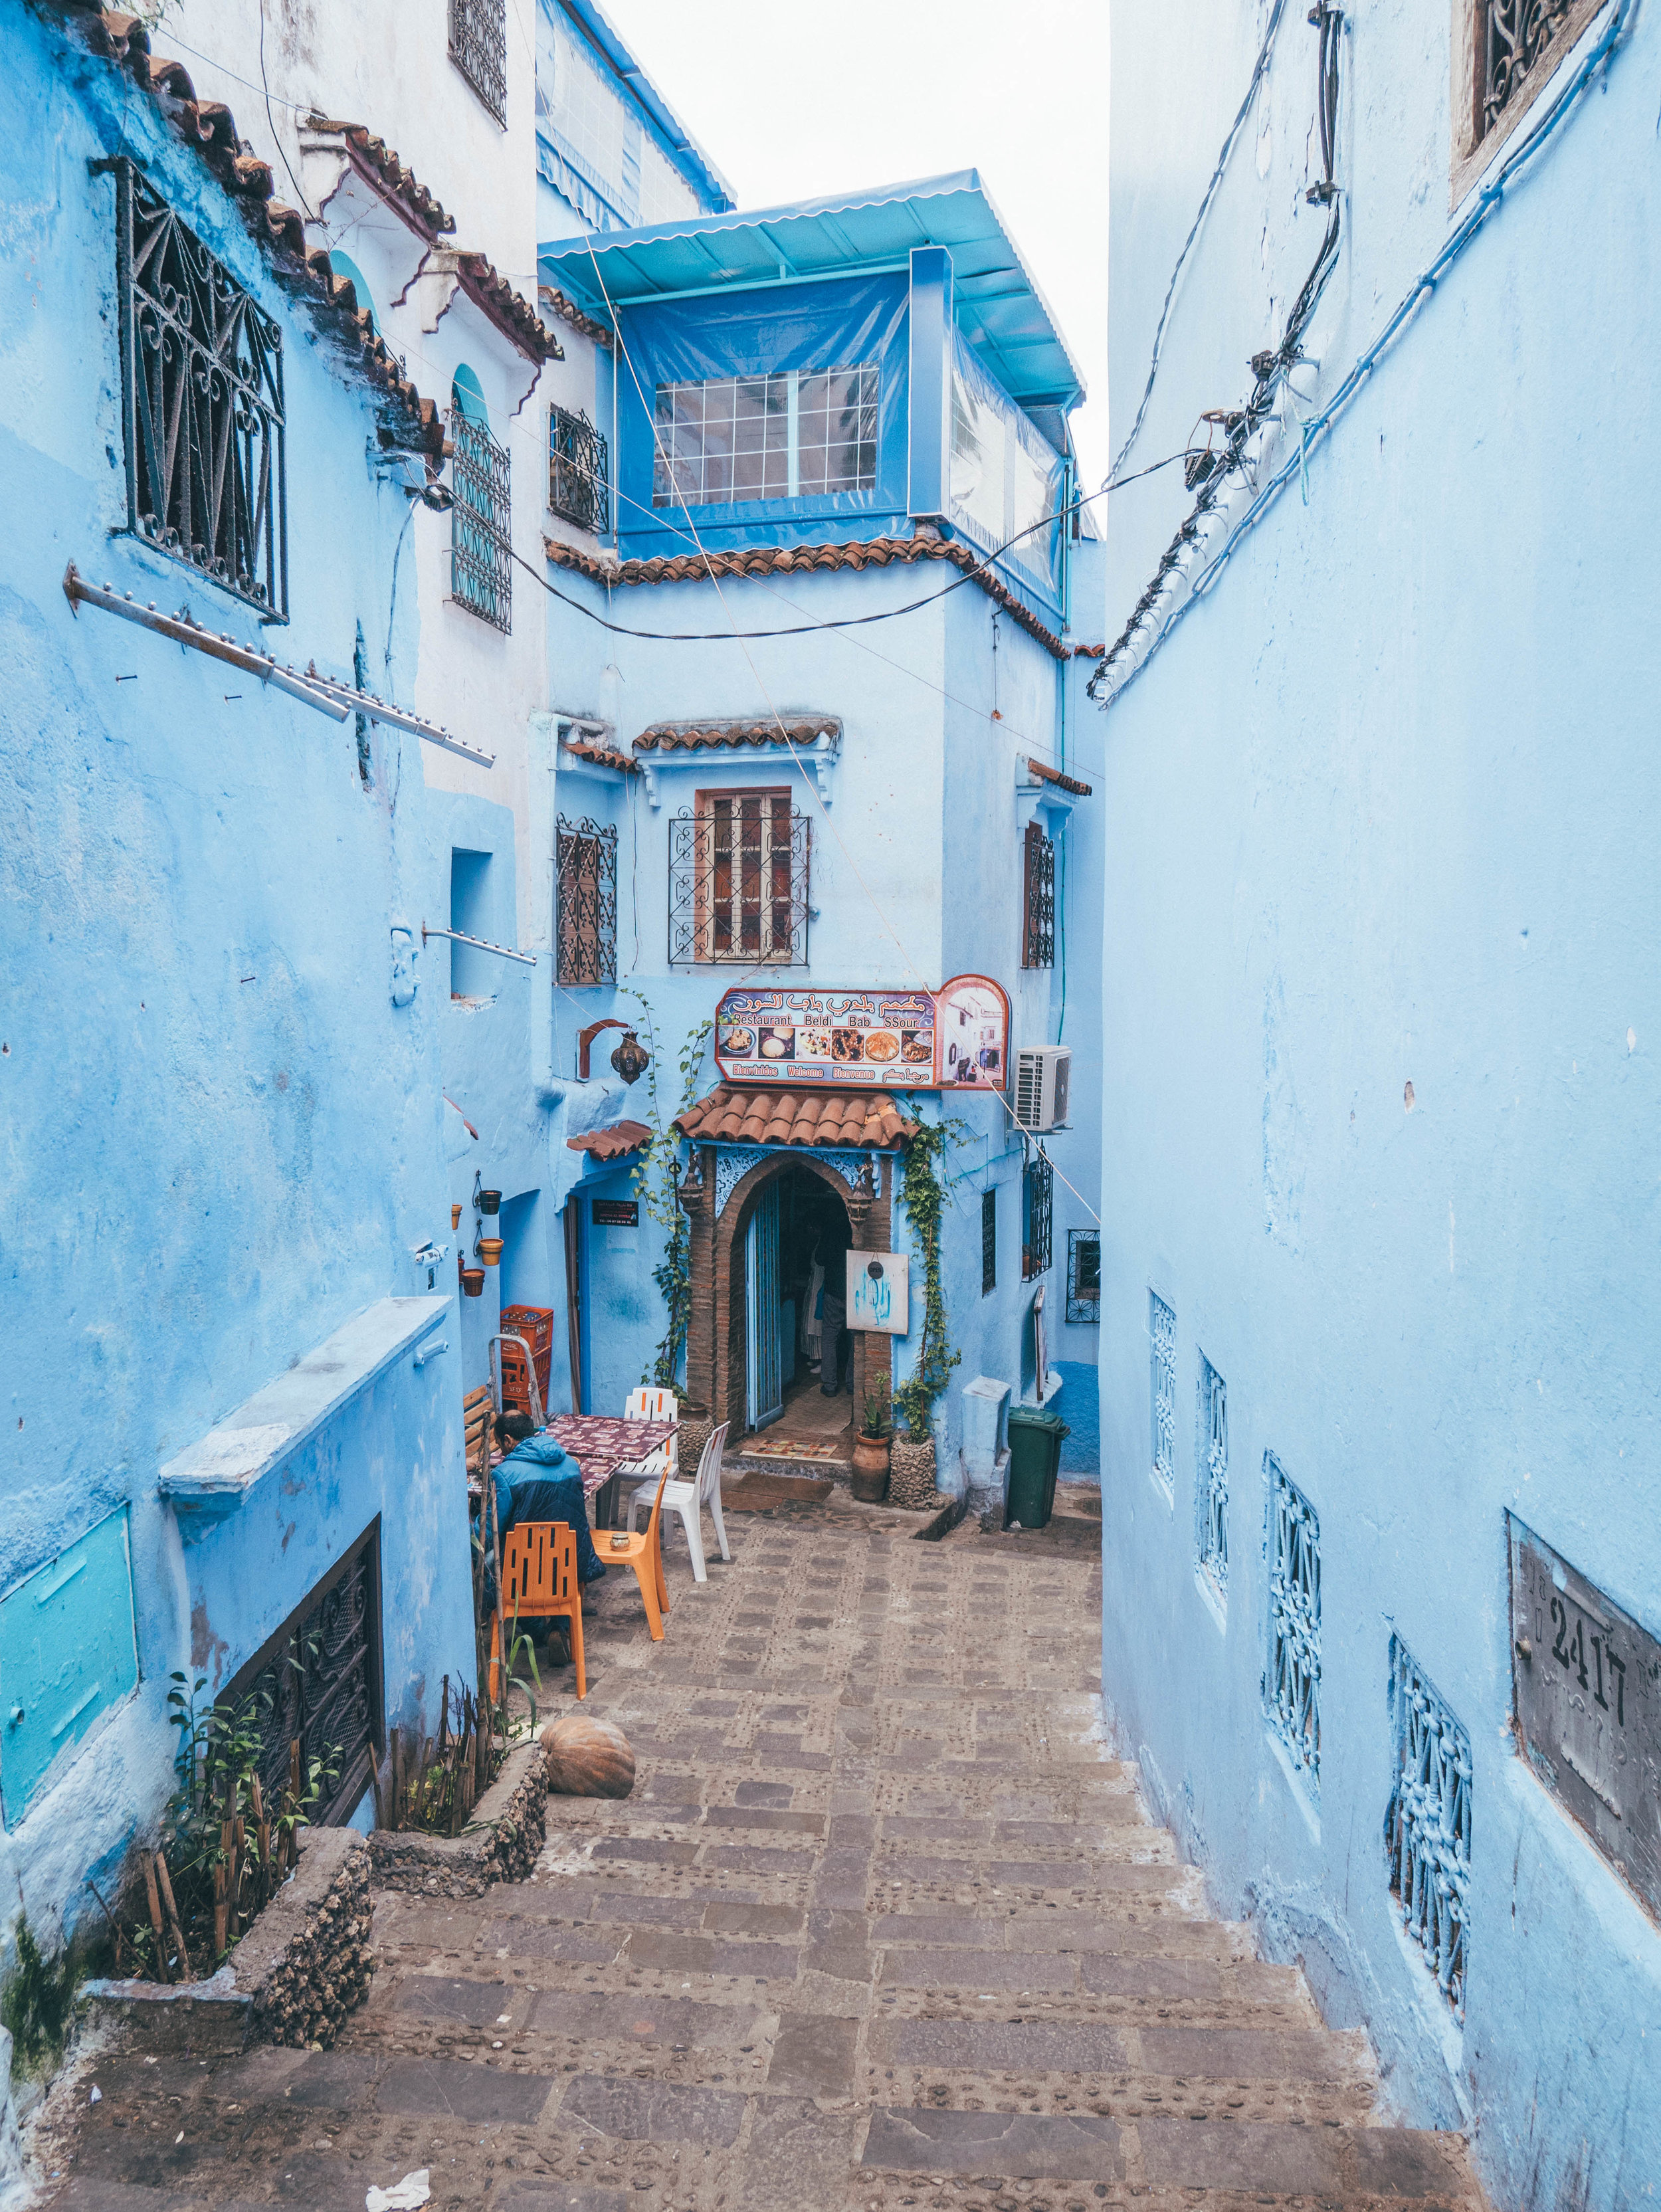 Yet another cute blue street - Chefchaouen - Morocco